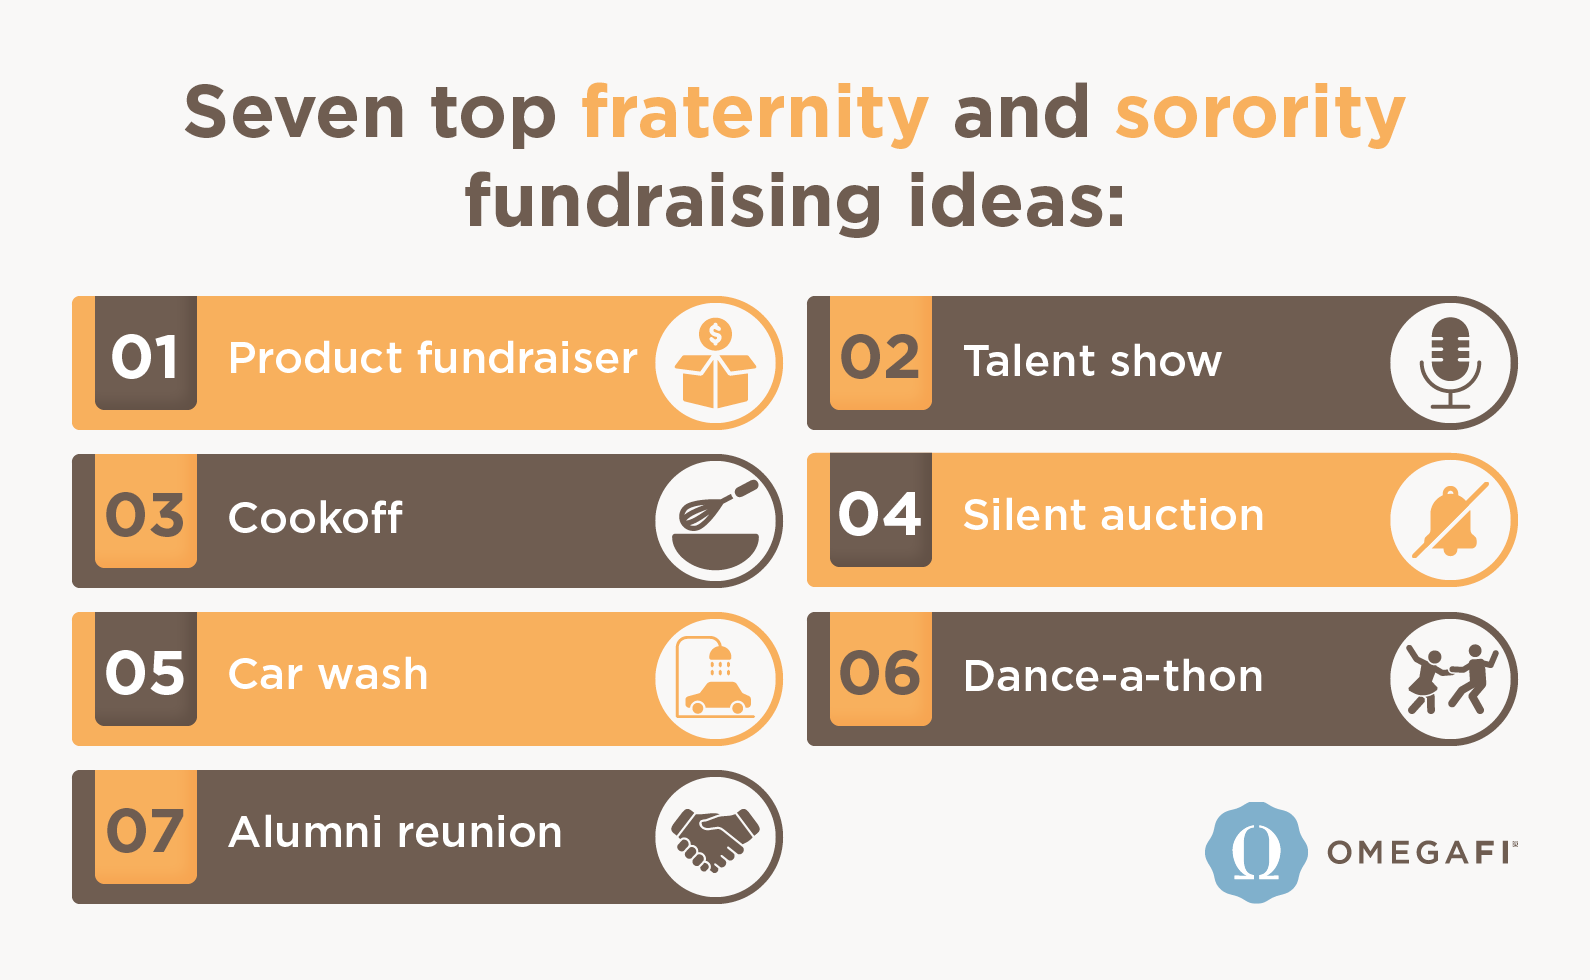 A graphic showing the seven top fraternity and sorority fundraising ideas (as mentioned below).